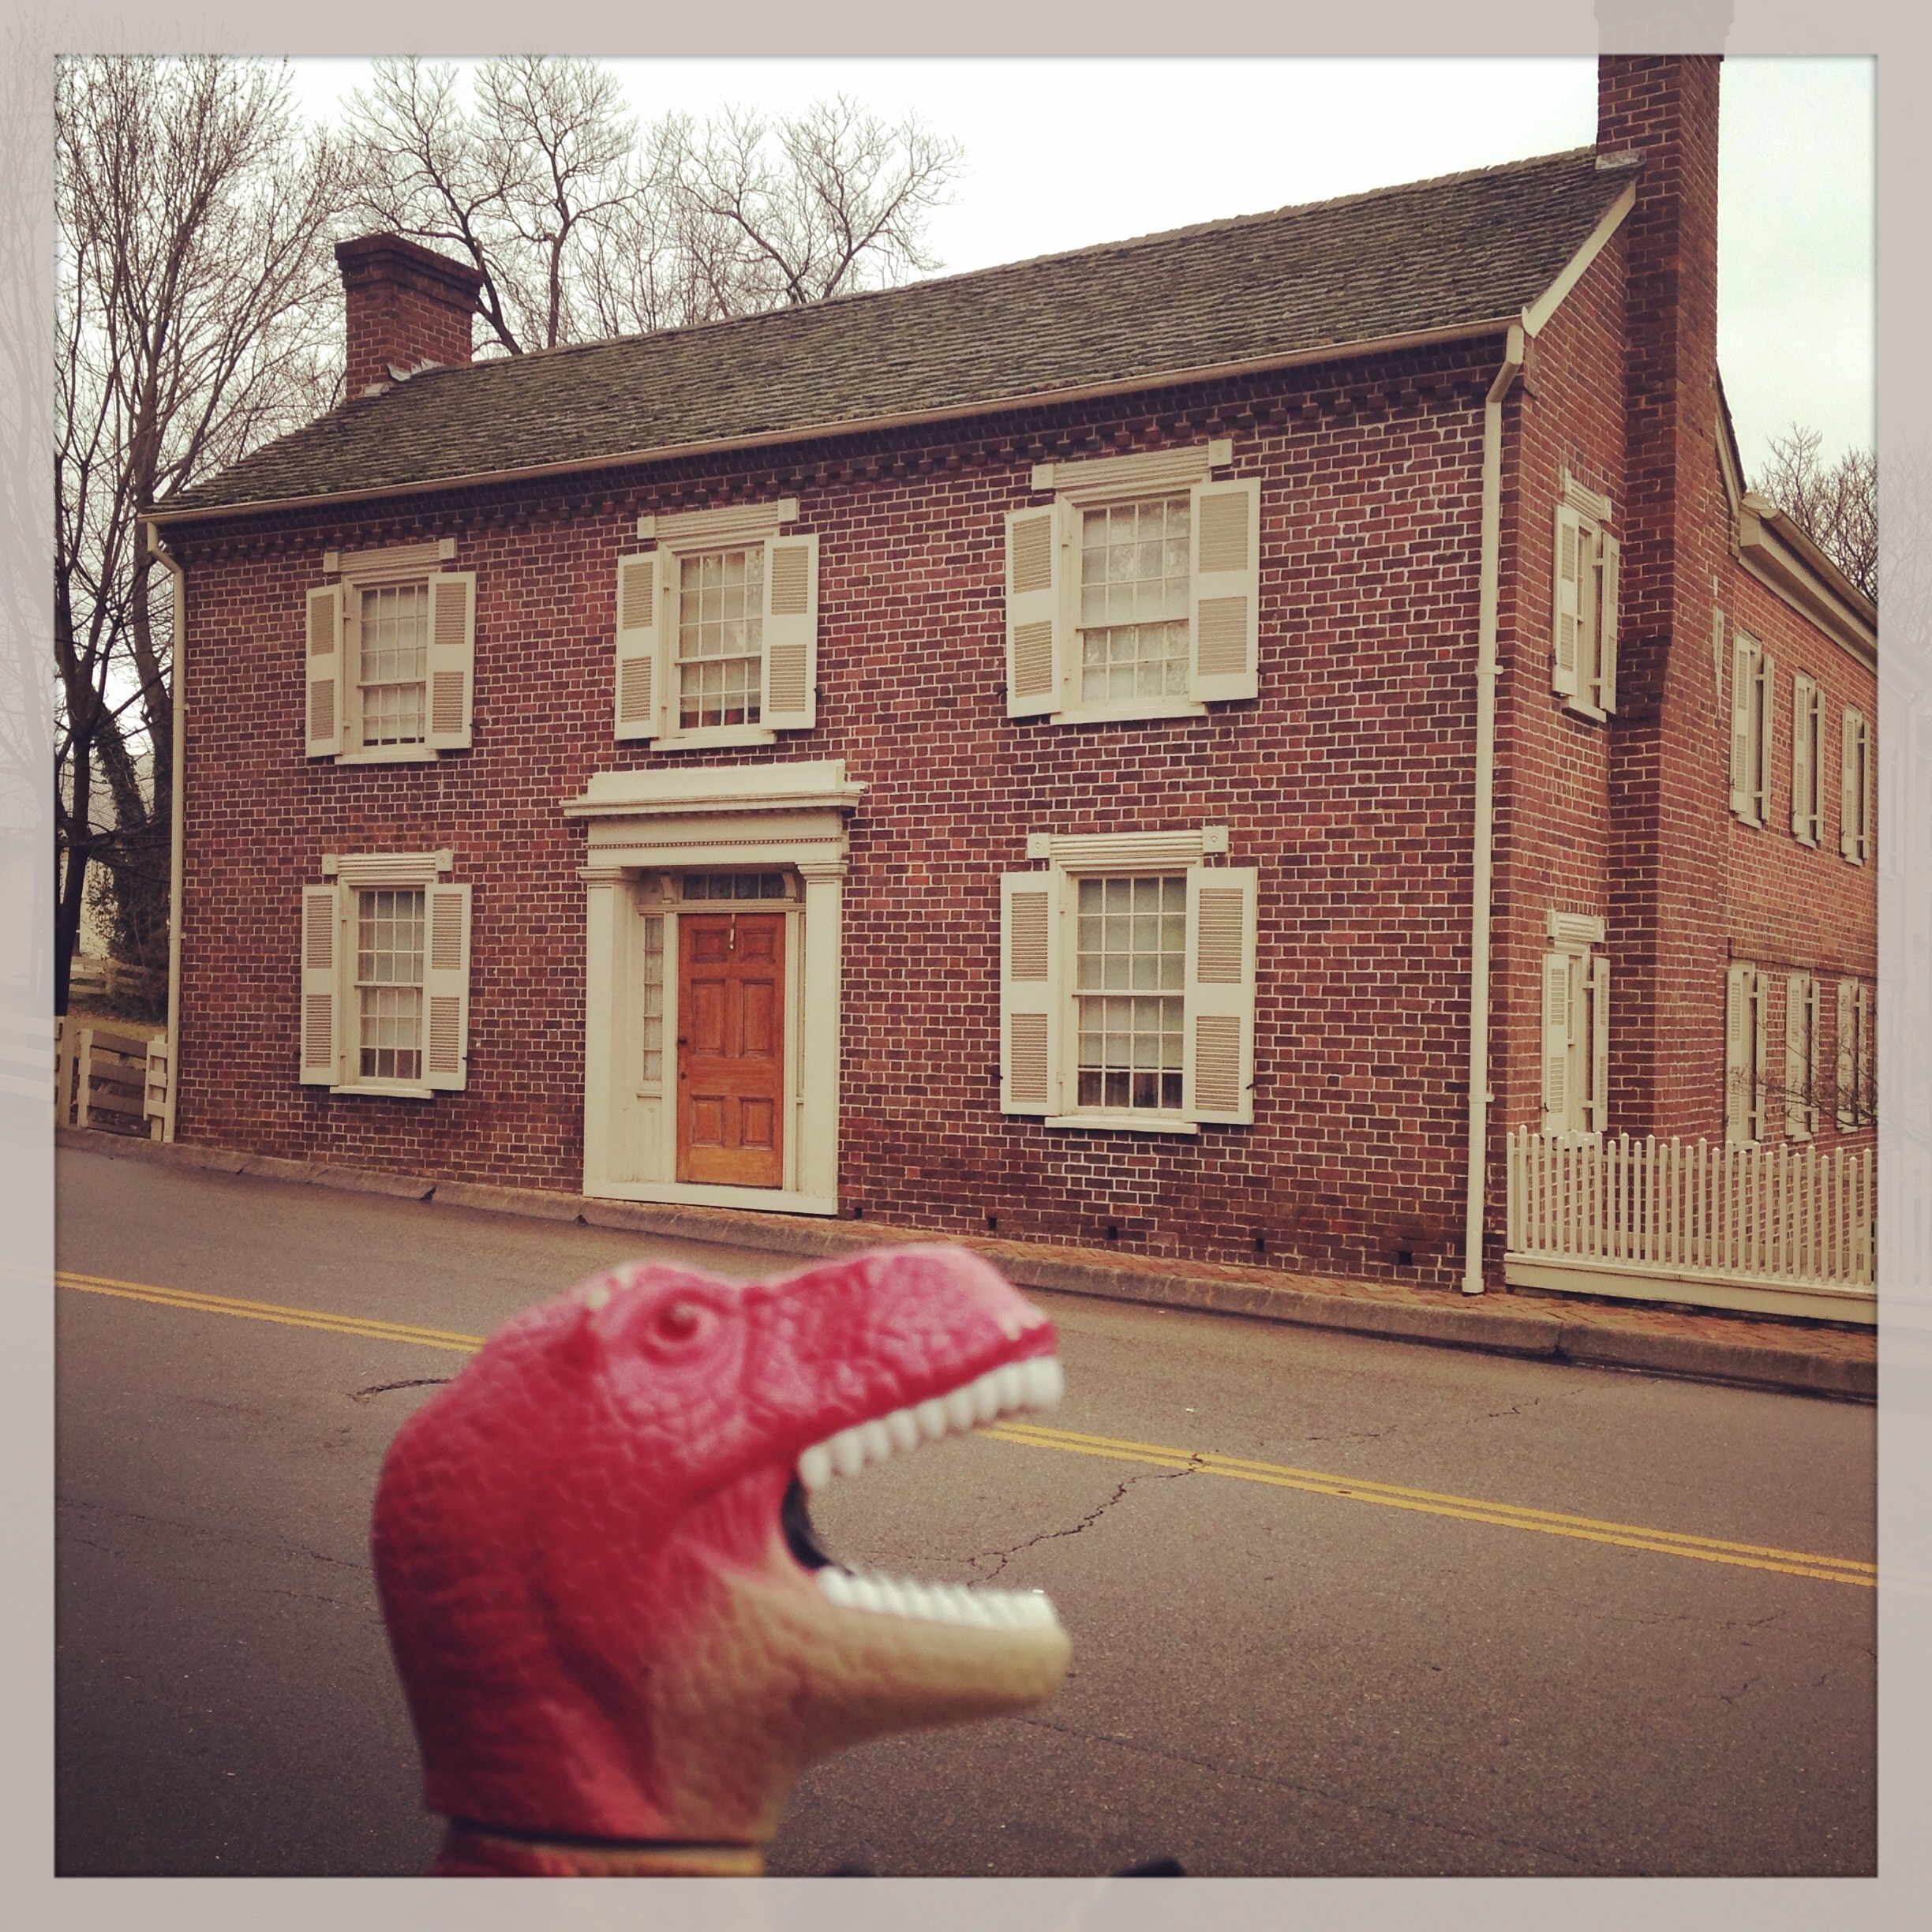 17th President of the US
Greeneville, TN
Stanley the Dino travels 
